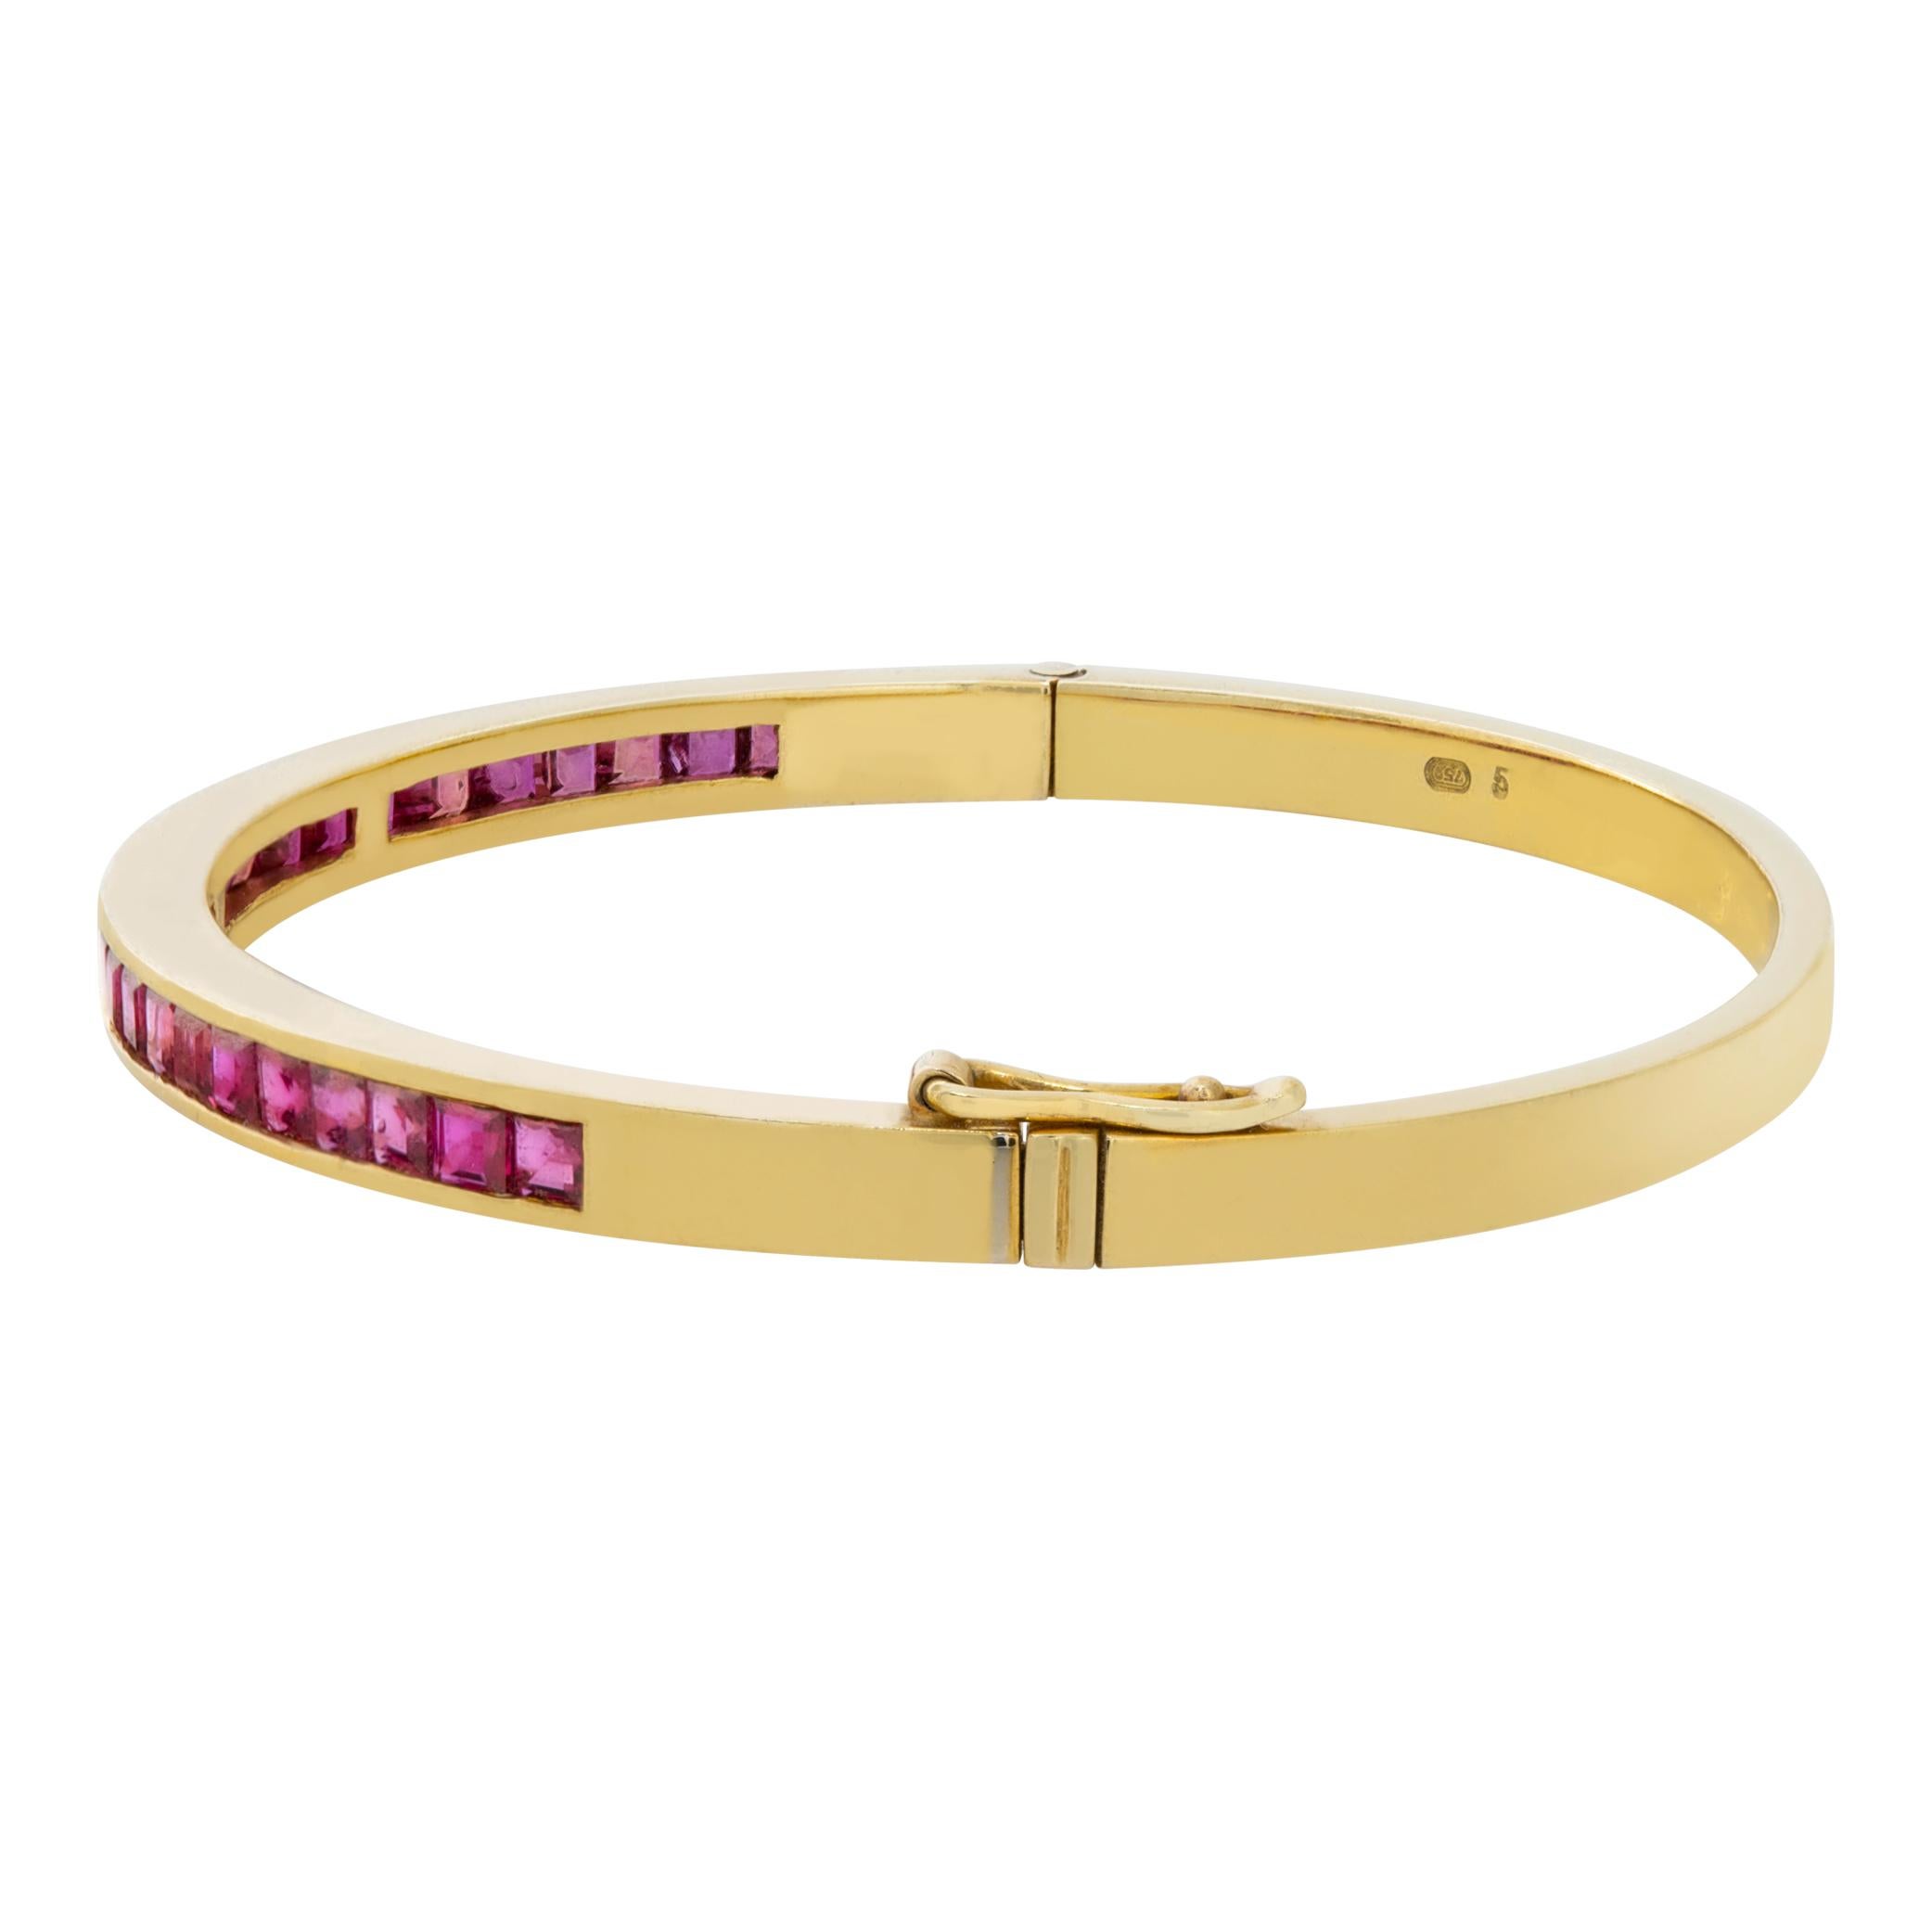 Sleek 18k yellow gold bangle with 1 carat in channel set square cut rubies. Fit for wrists up to 7.5 inches, has safety on clasp.